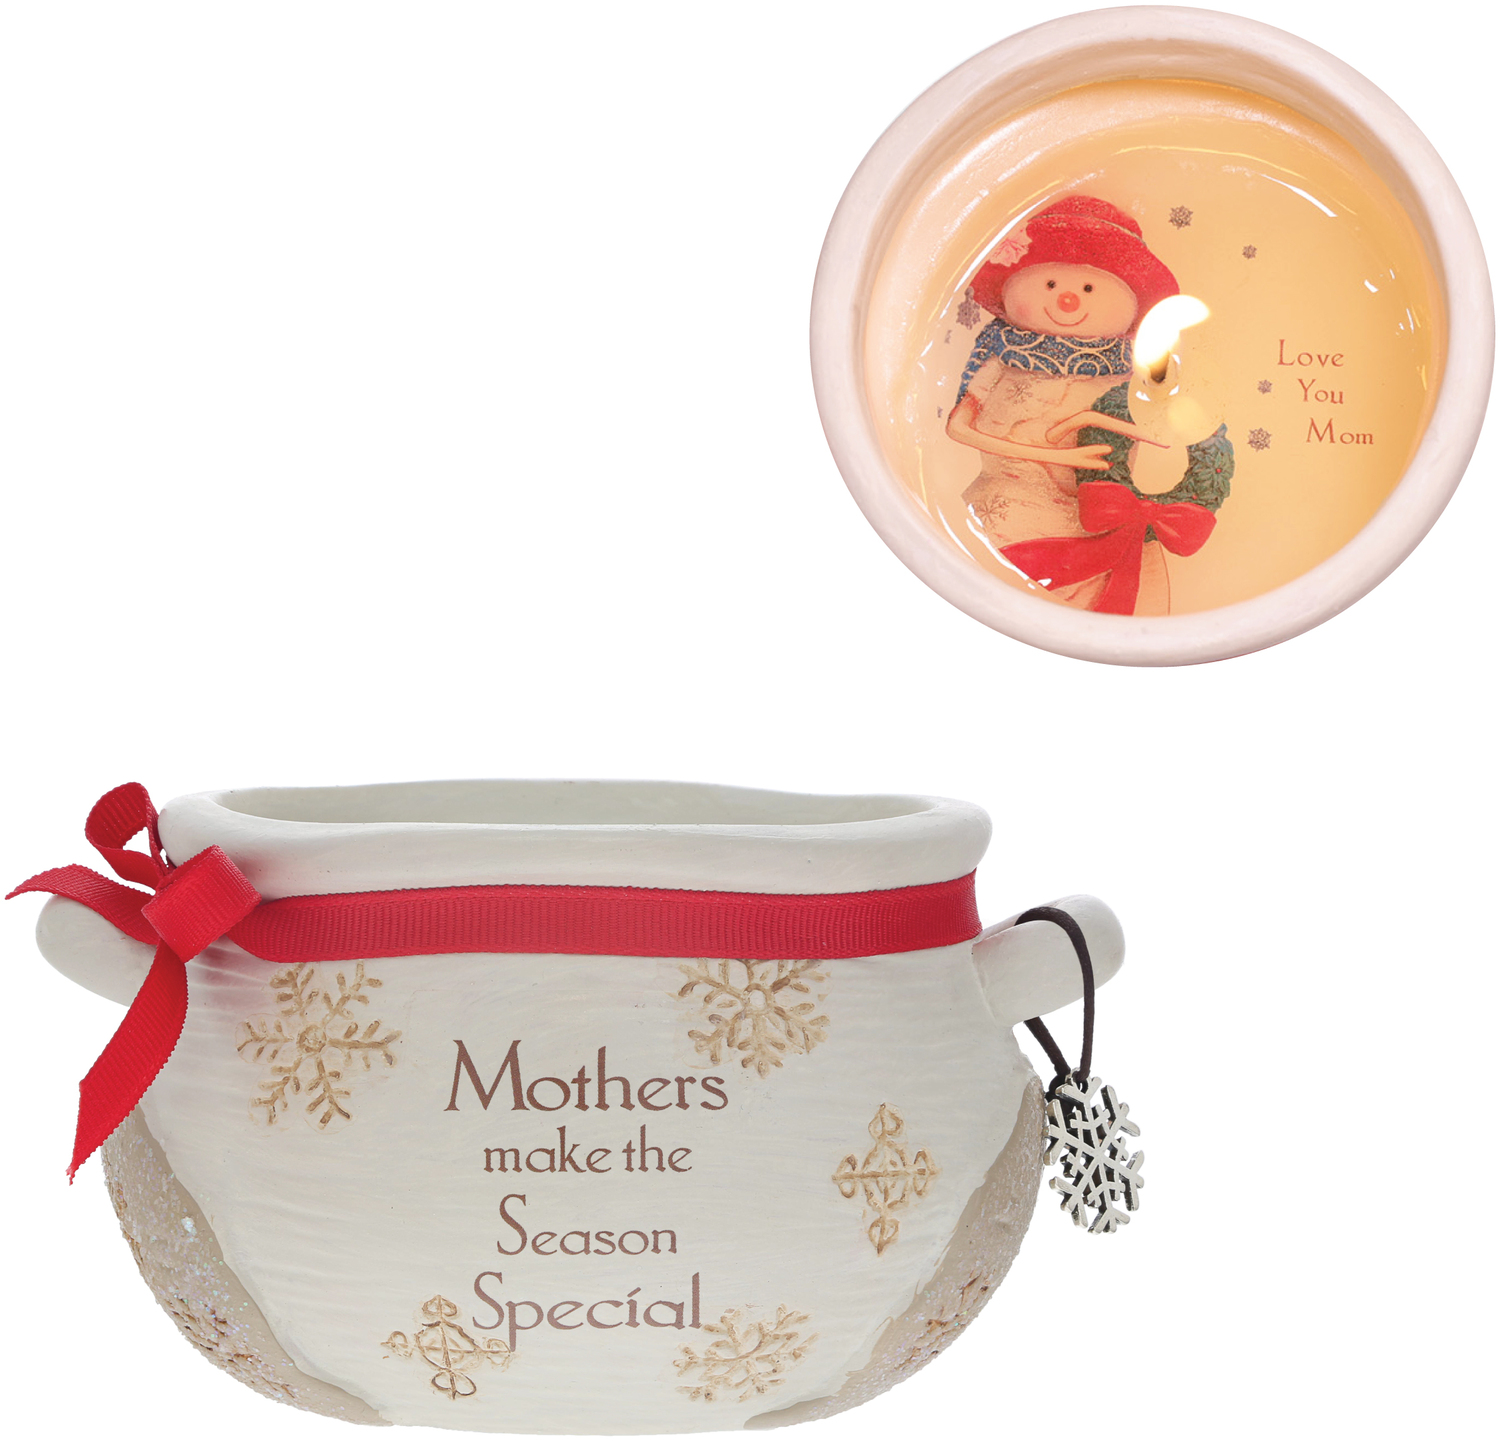 Mothers by The Birchhearts - Mothers - 9 oz - 100% Soy Wax Reveal Candle
Scent: Winter Snow